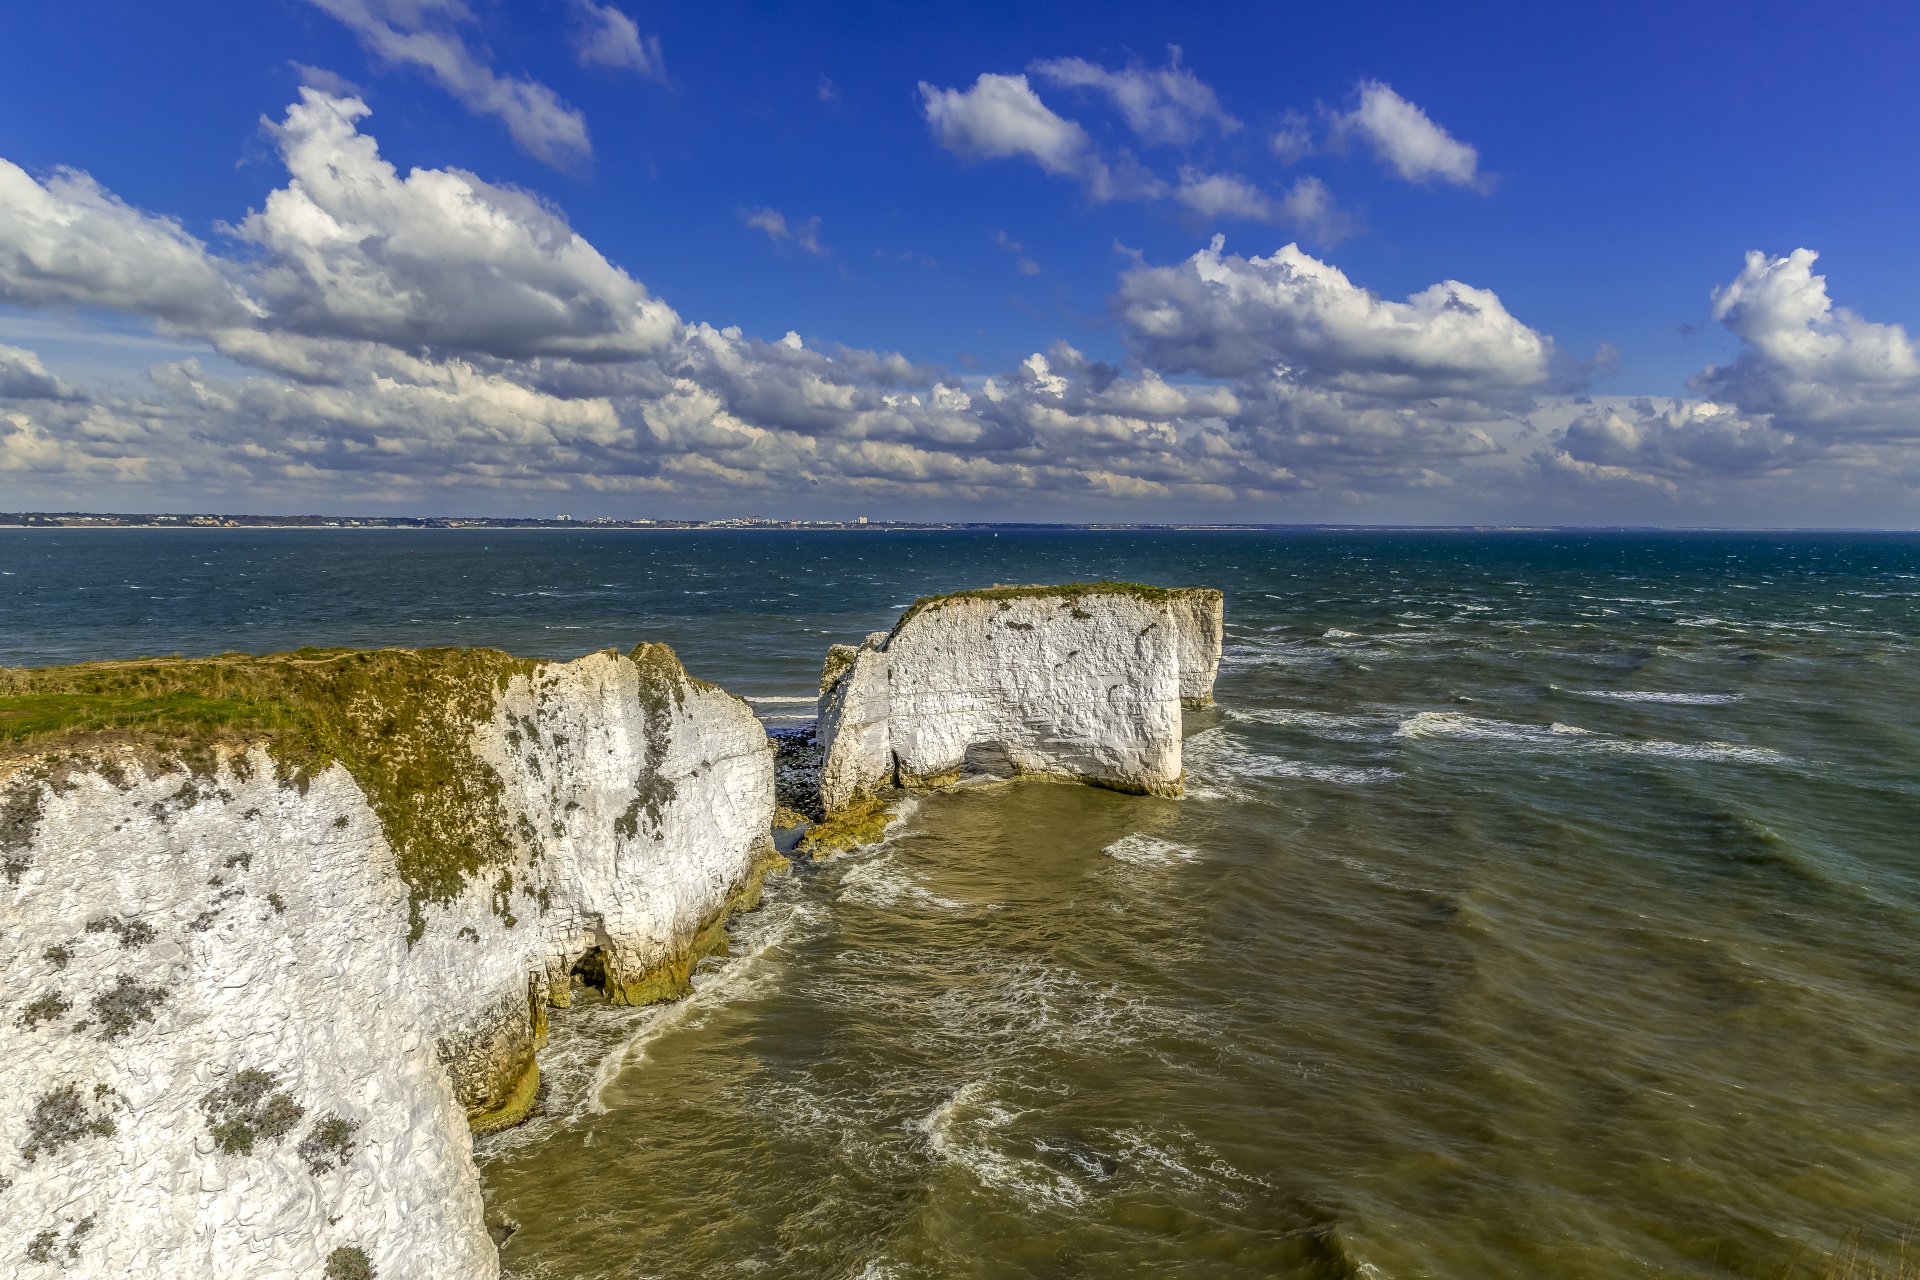 Old Harry Rocks are three chalk formations, including a stack and a stump, located at Handfast Point, on the Isle of Purbeck in Dorset, southern England. They mark the most eastern point of the Jurassic Coast, a UNESCO World Heritage Site